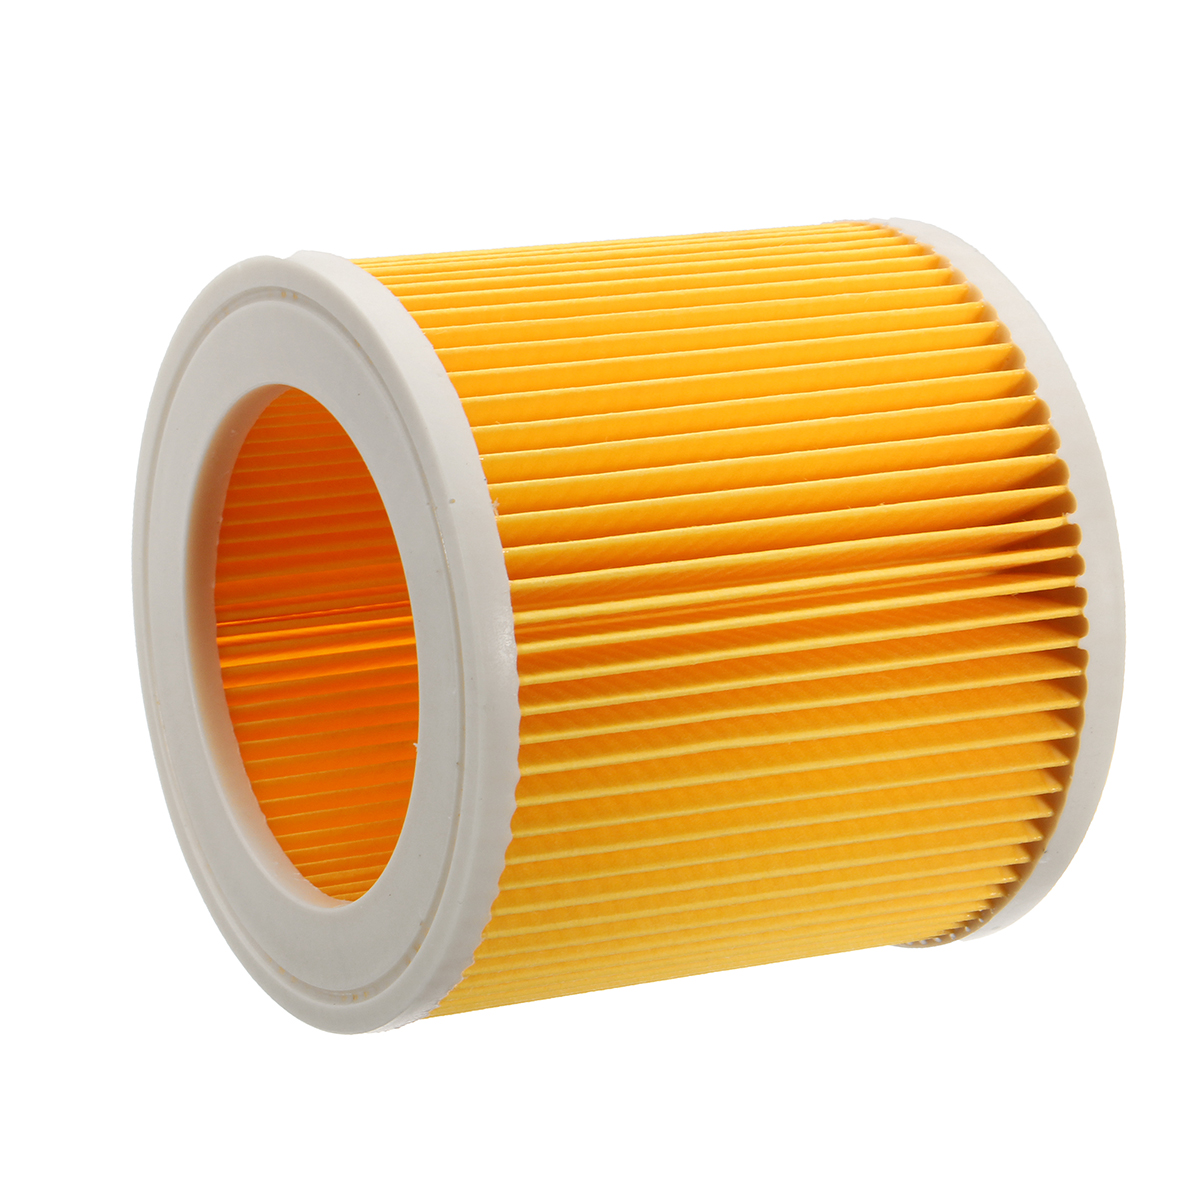 Wet-amp-Dry-Vacuum-Cleaner-Cartridge-Filter-Replacement-for-Karcher-MV2-WD2200-WD3500-A2504-A2654-1212097